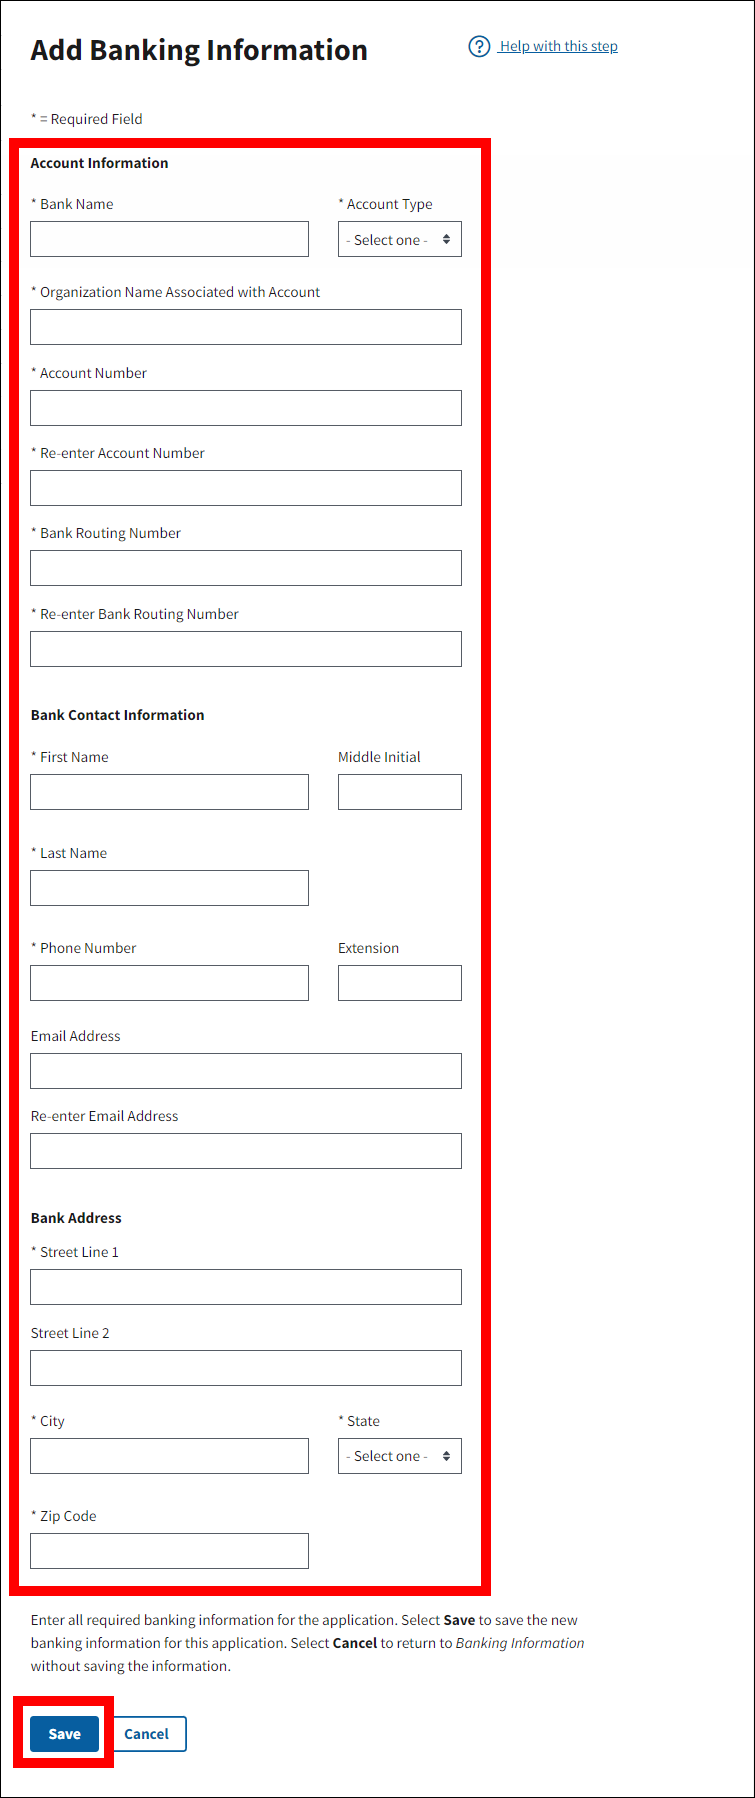 Add Banking Information page with form fields and Save button highlighted.